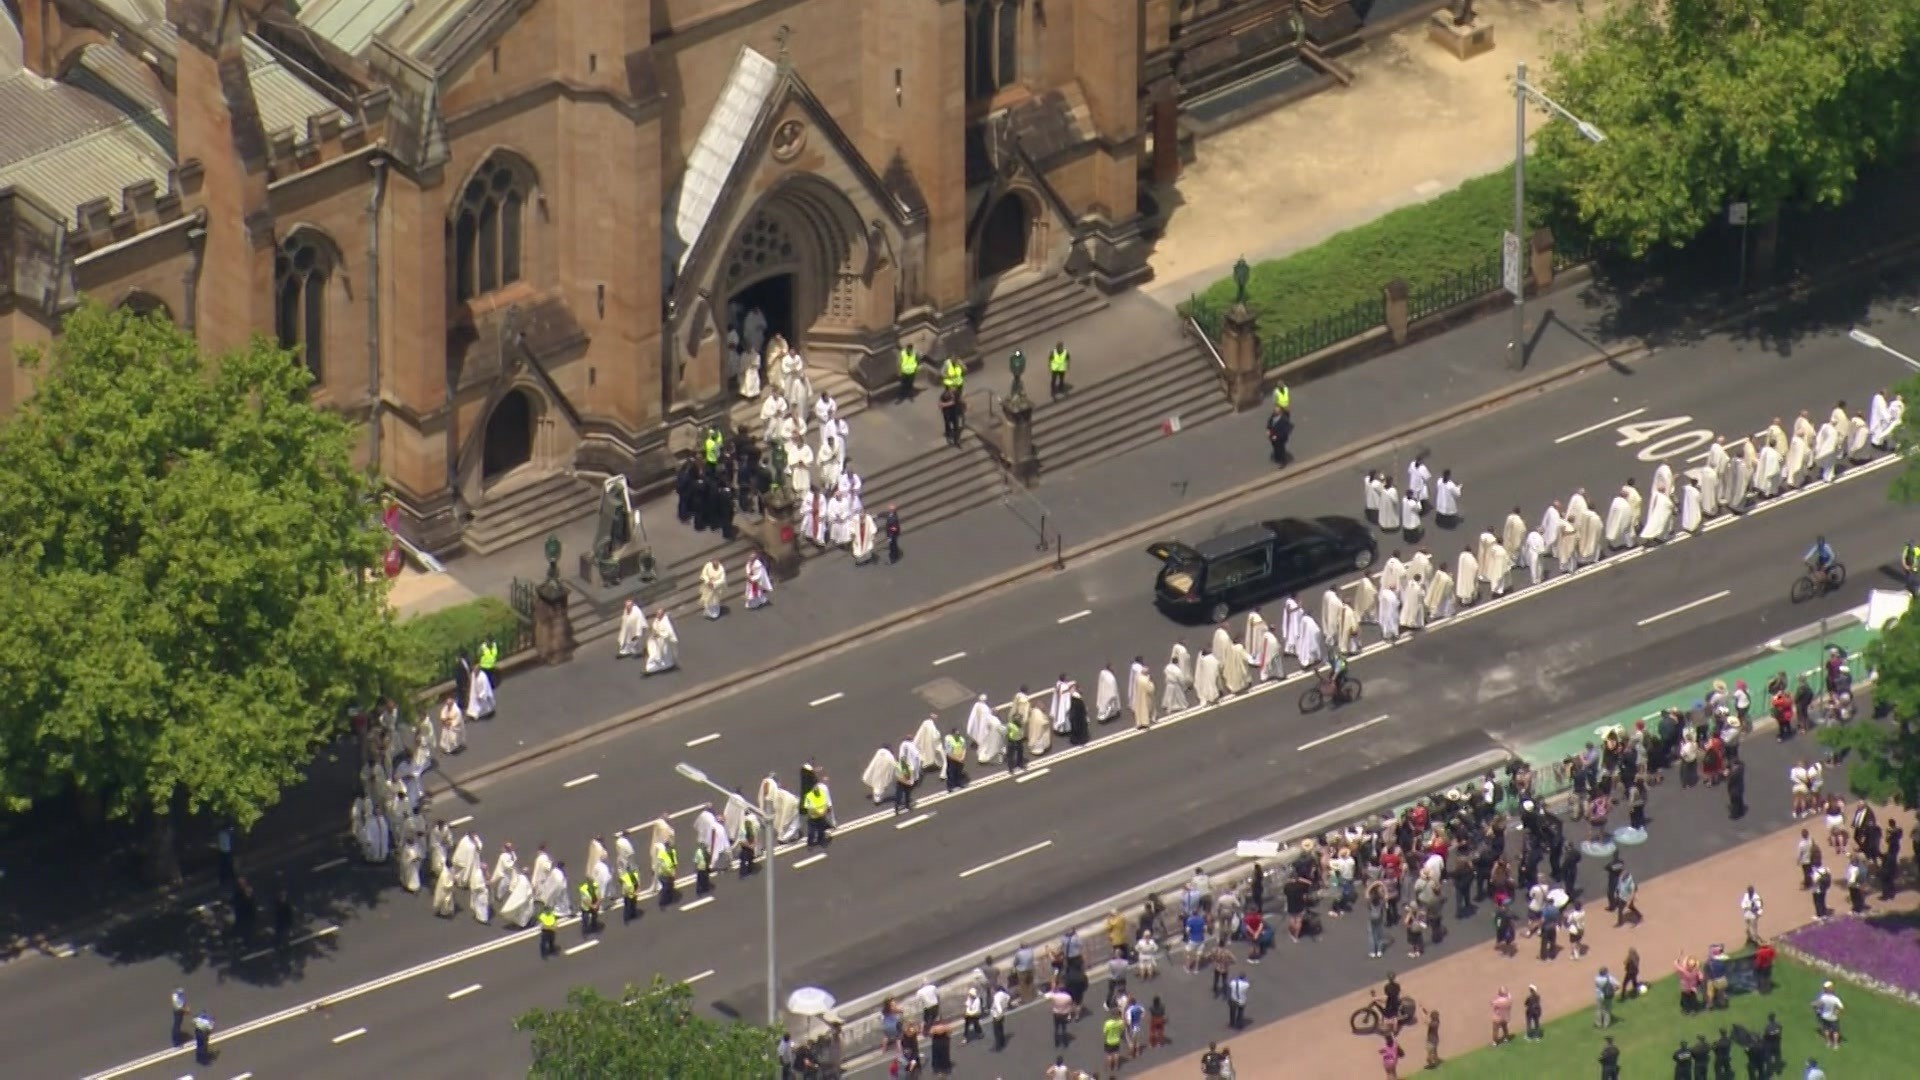 People in religious outfits stand around a hearse